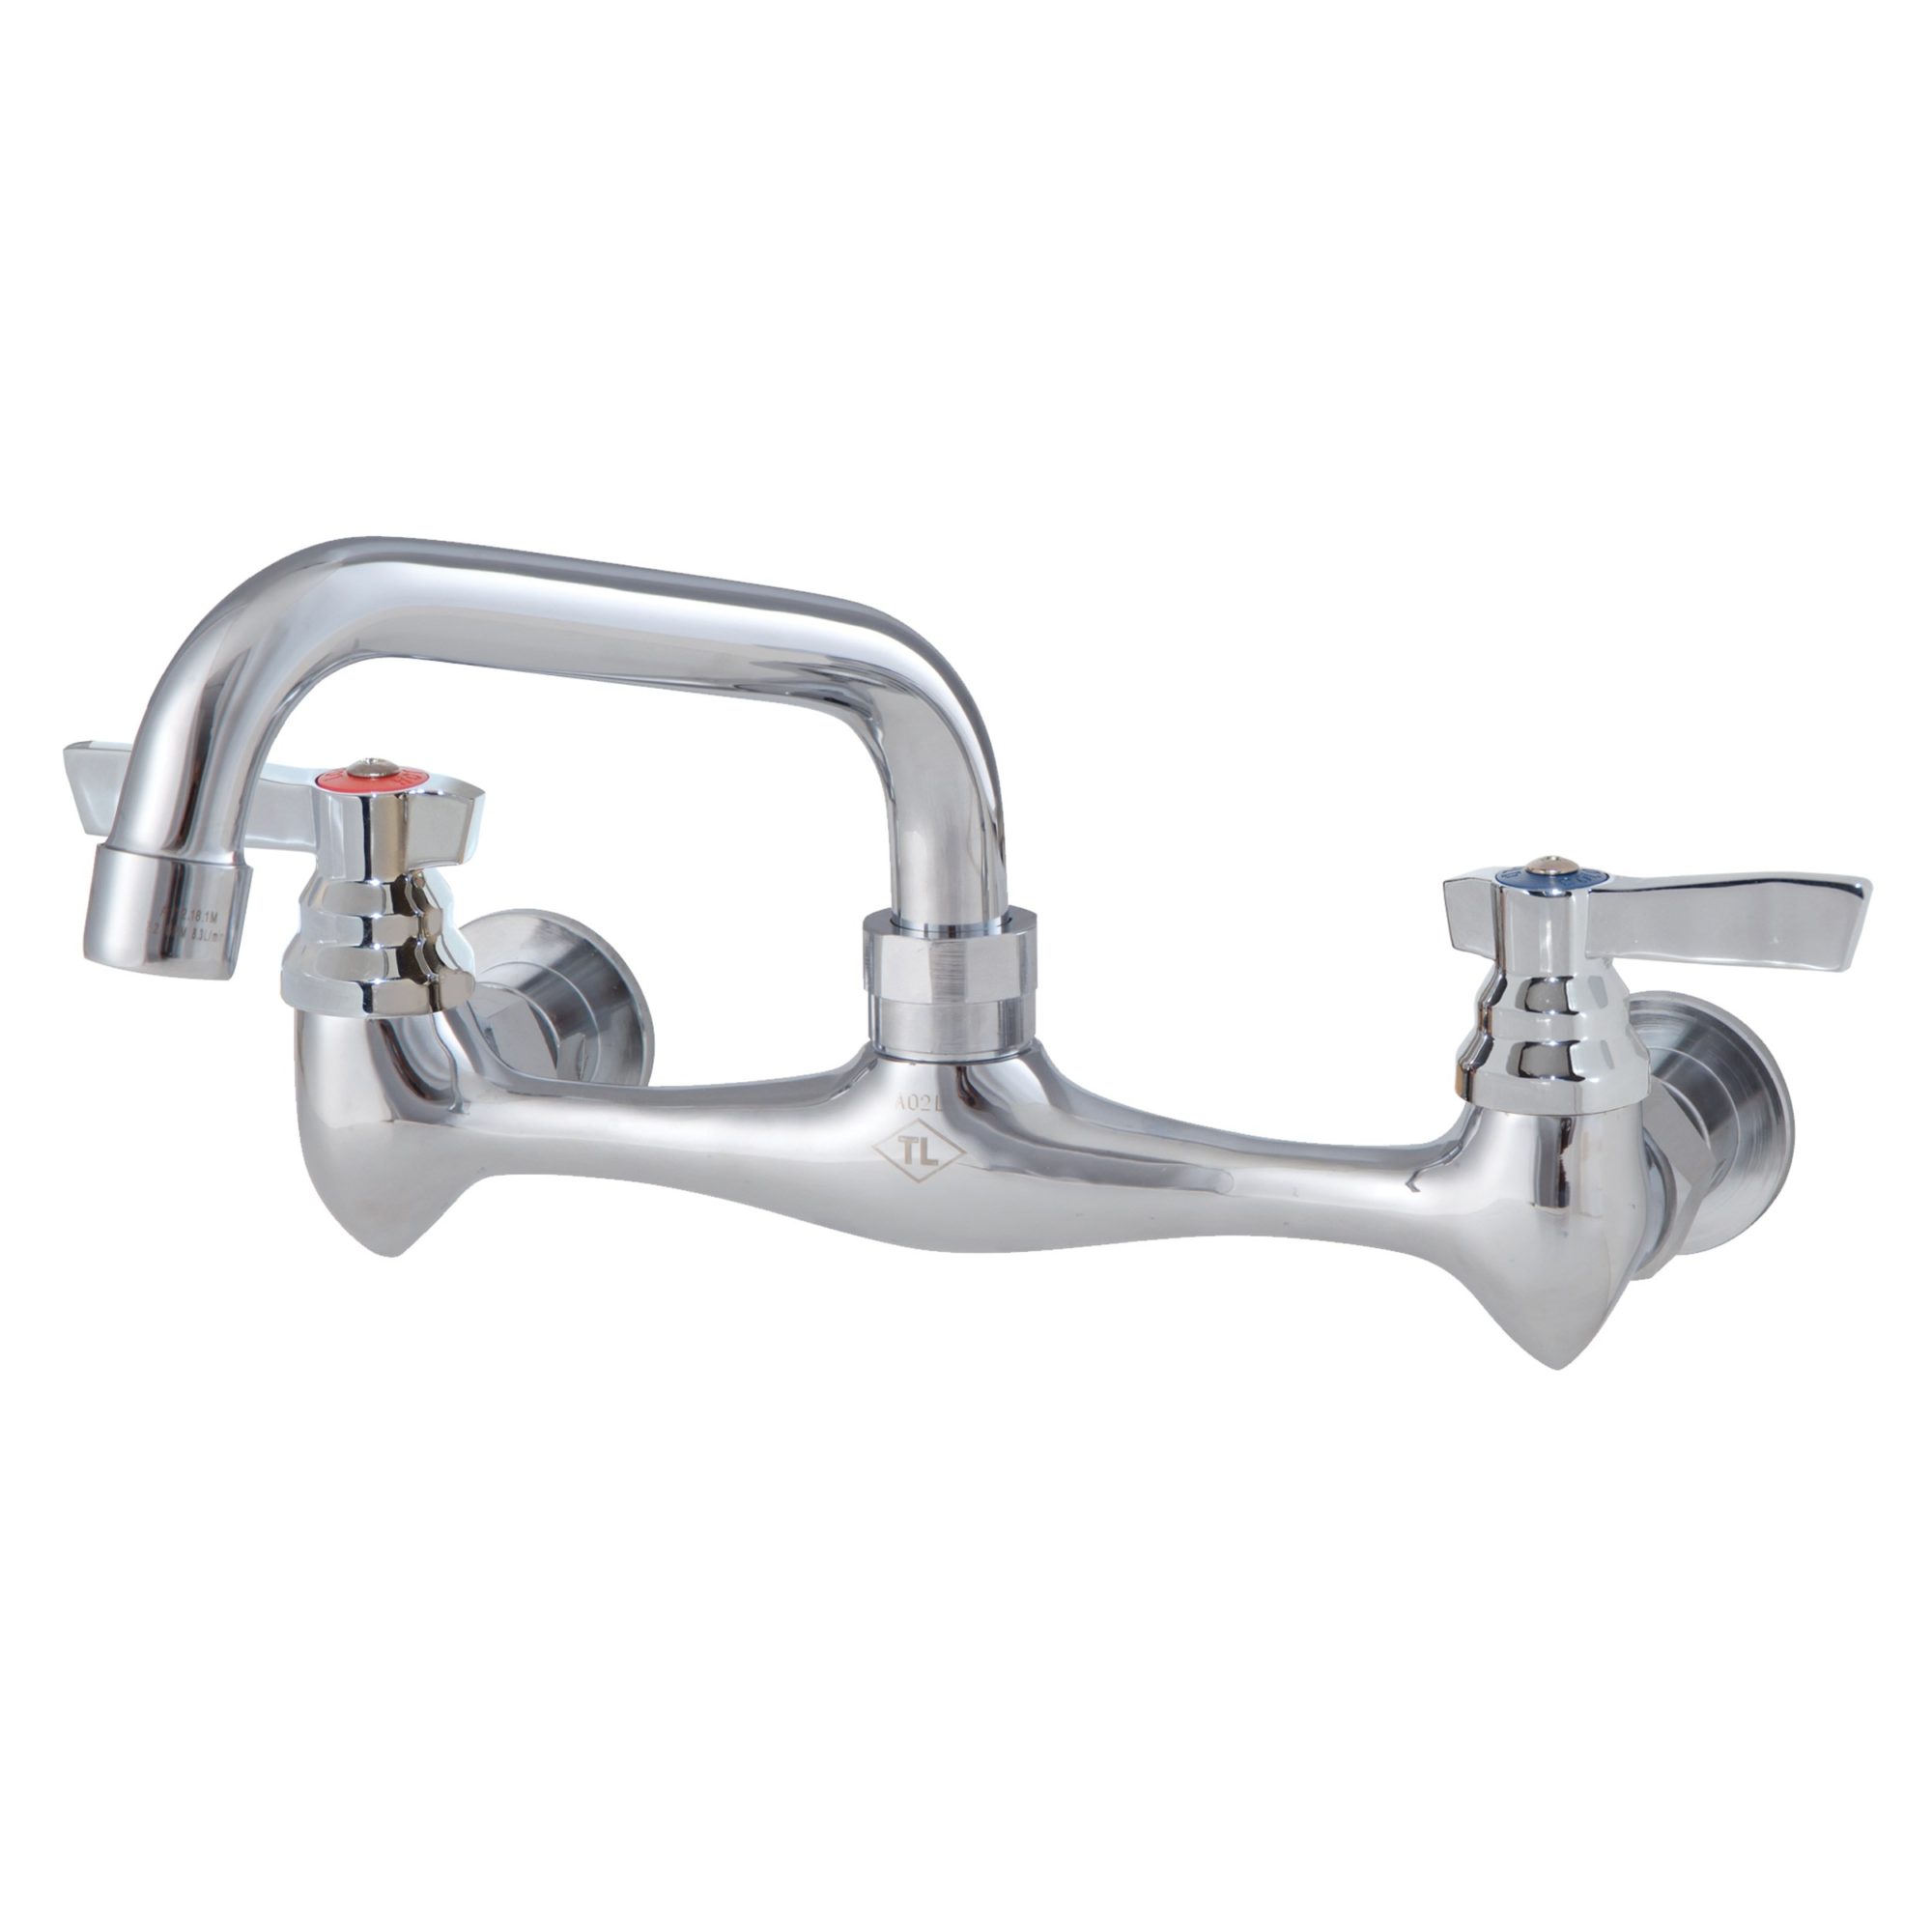 Top-line Wall Mount 12" Faucet Tll13-8112-SE1Z